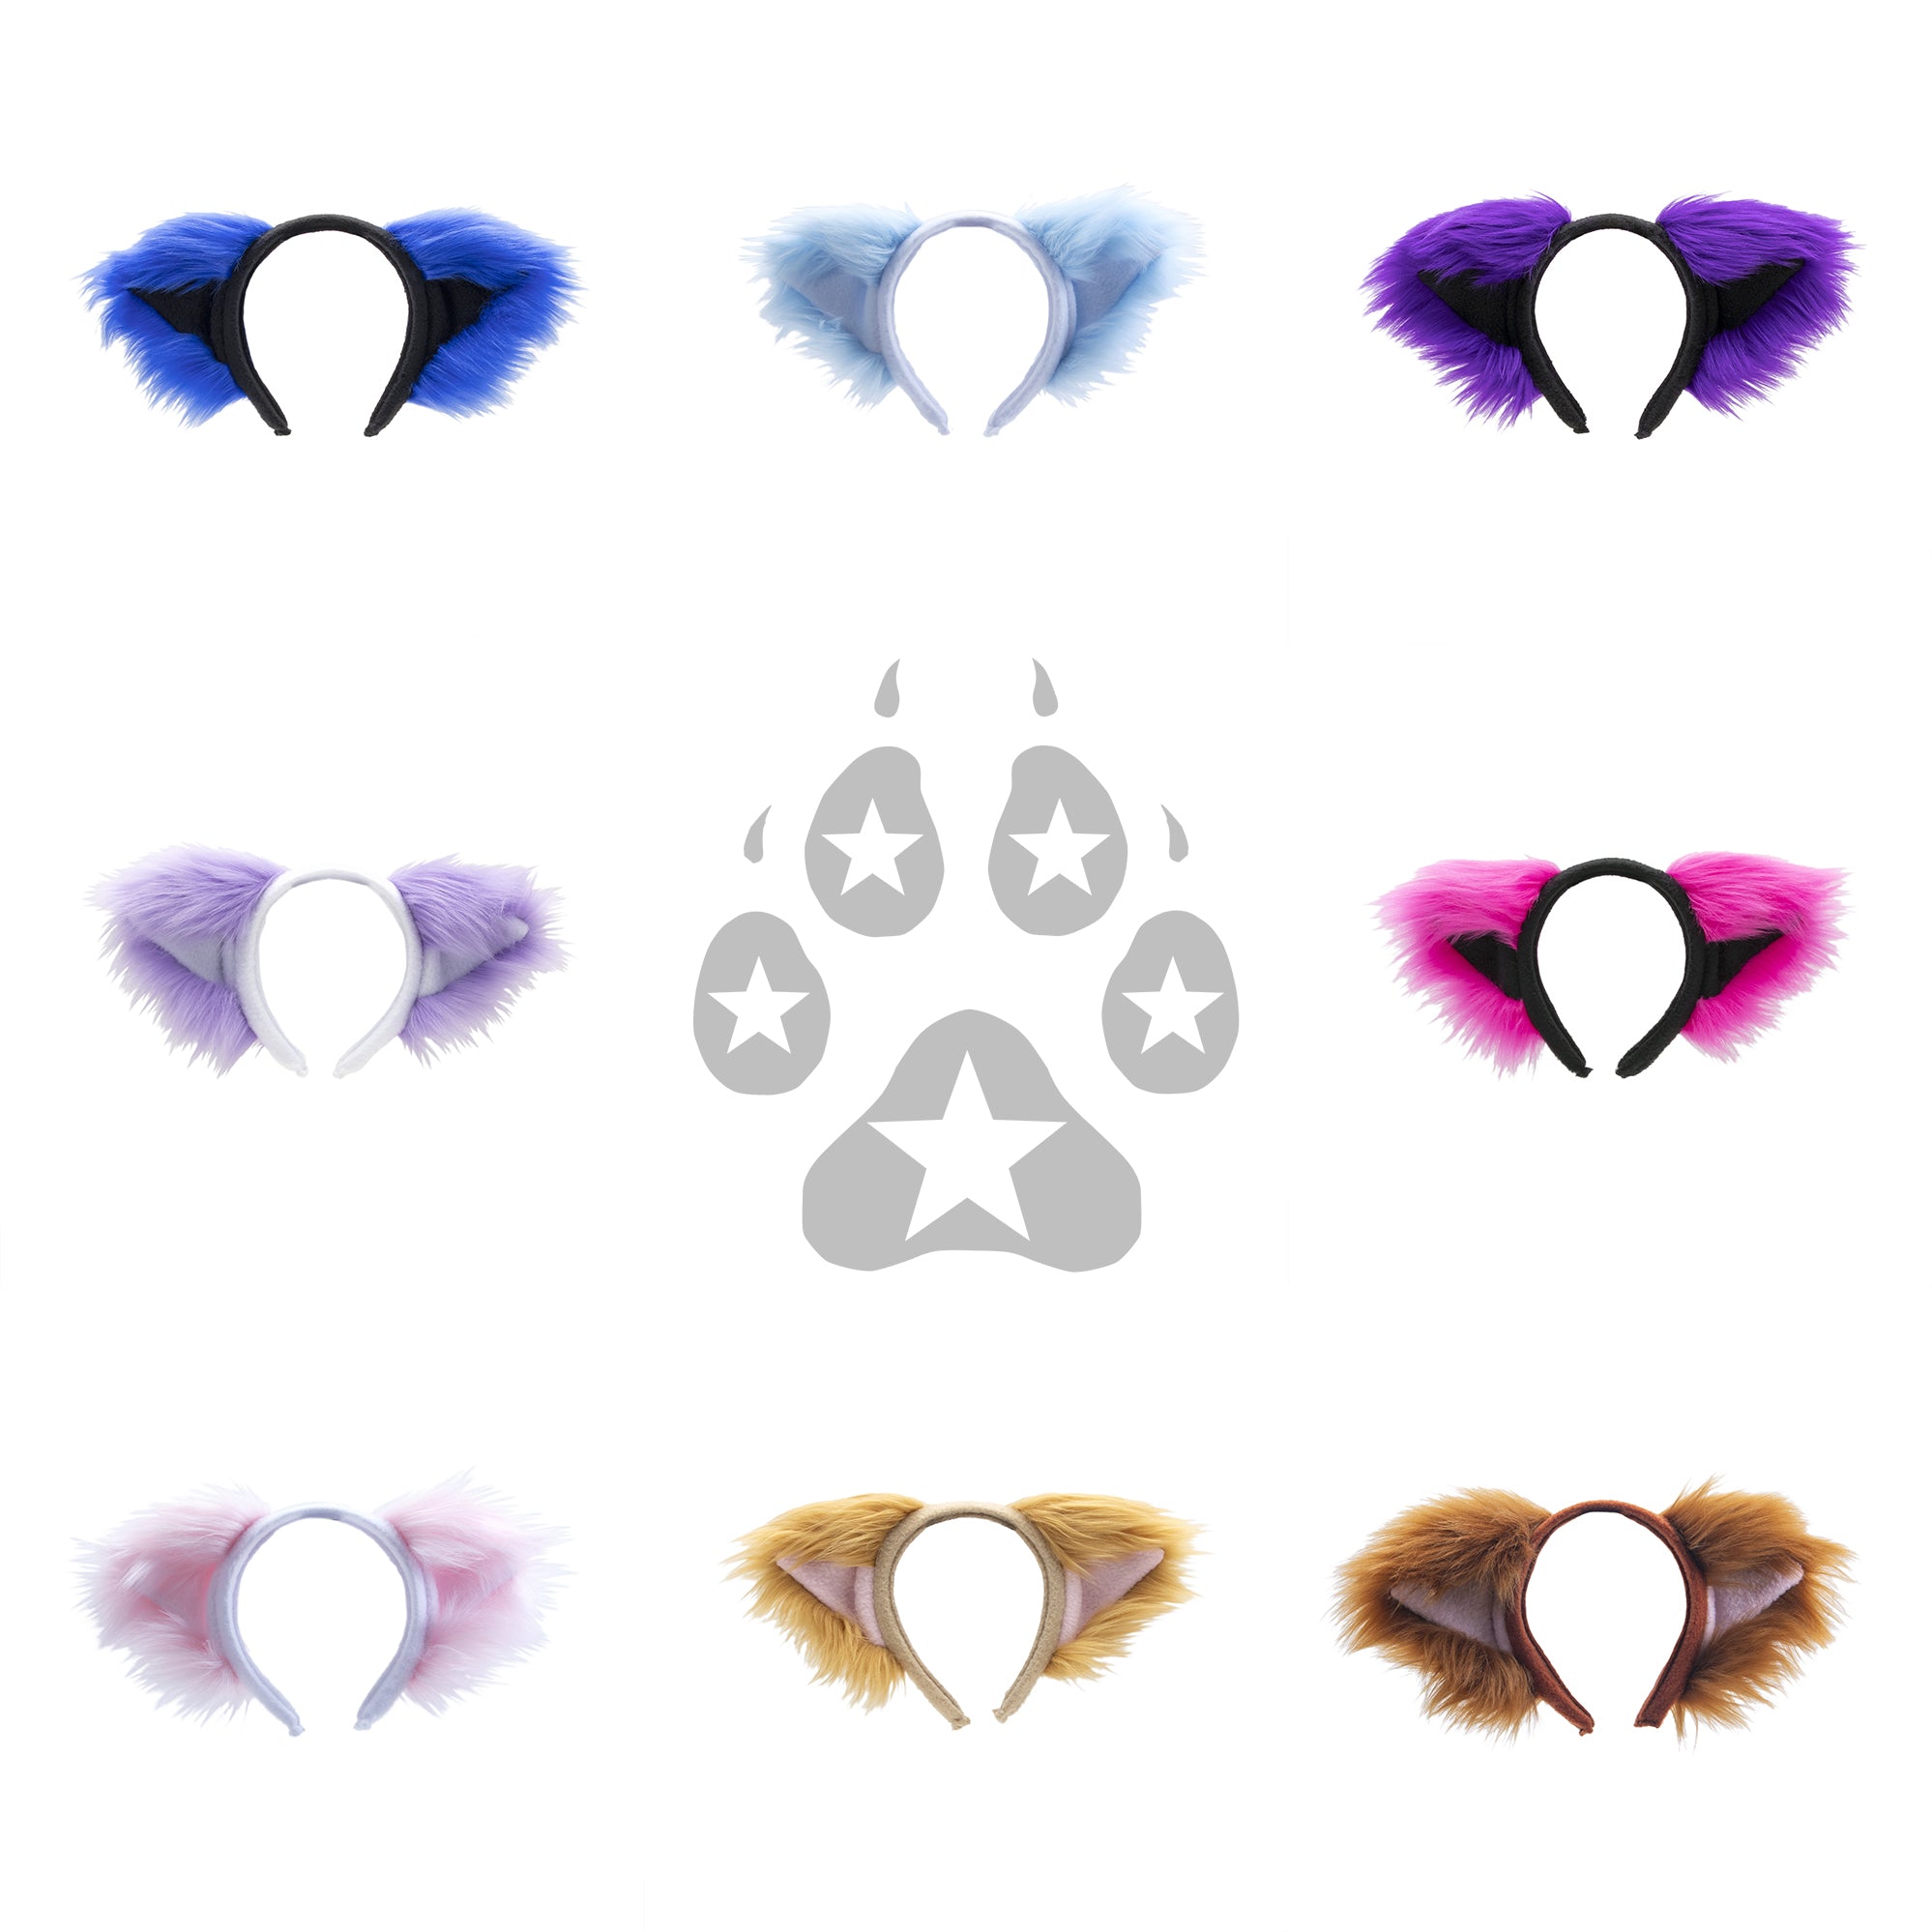 Pawstar Mew Kitty Cat kitten ear headband. Made from faux fur. great for furries costumes halloween cosplay and more. Made in the usa.